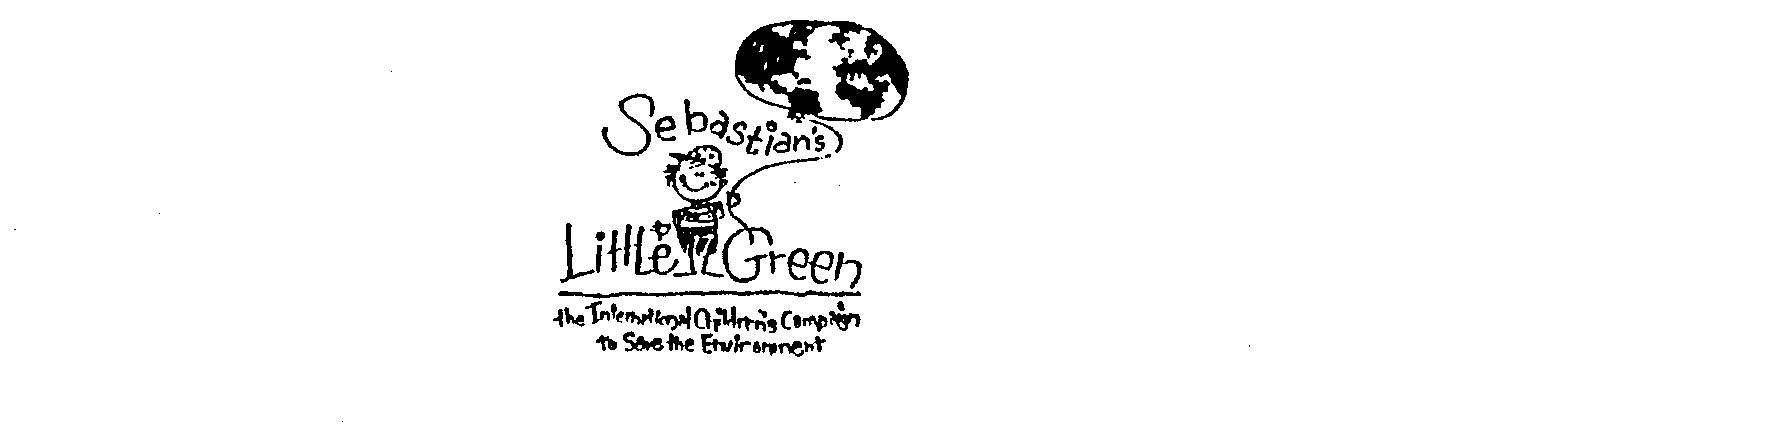  SEBASTIAN'S LITTLE GREEN THE INTERNATIONAL CHILDREN'S CAMPAIGN TO SAVE THE ENVIRONMENT